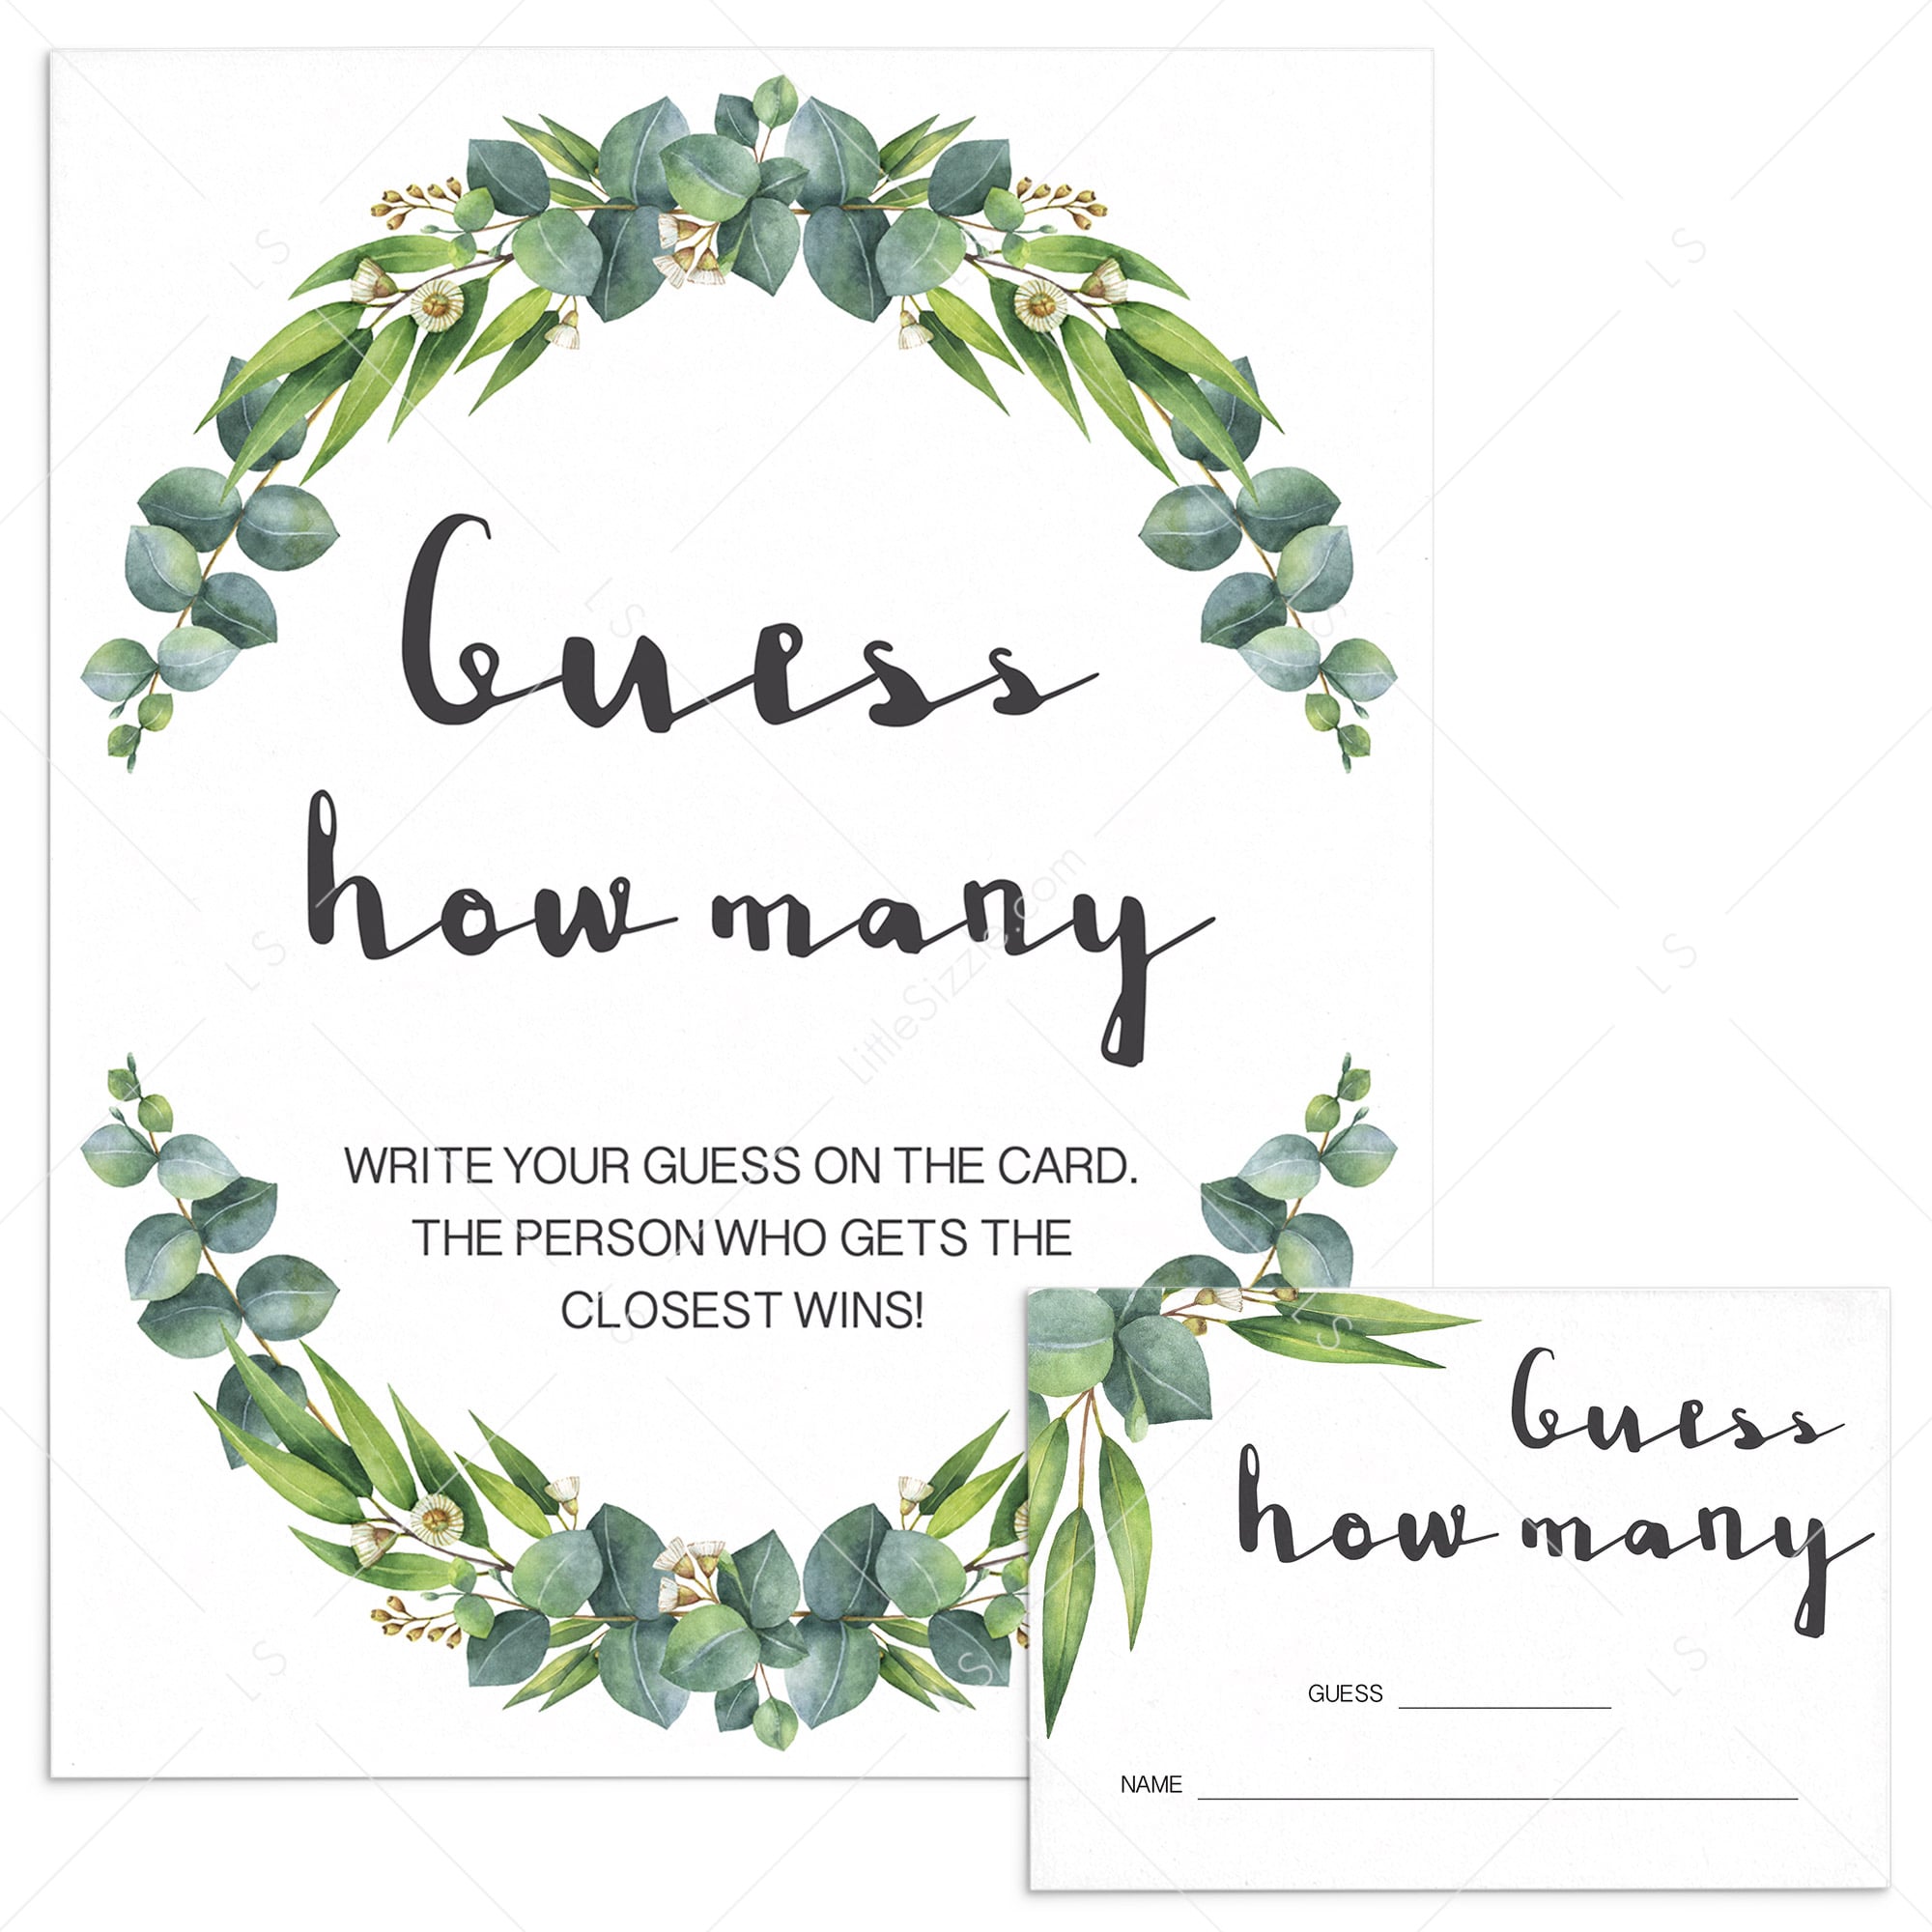 Greenery wreath baby shower guess how many game by LittleSizzle